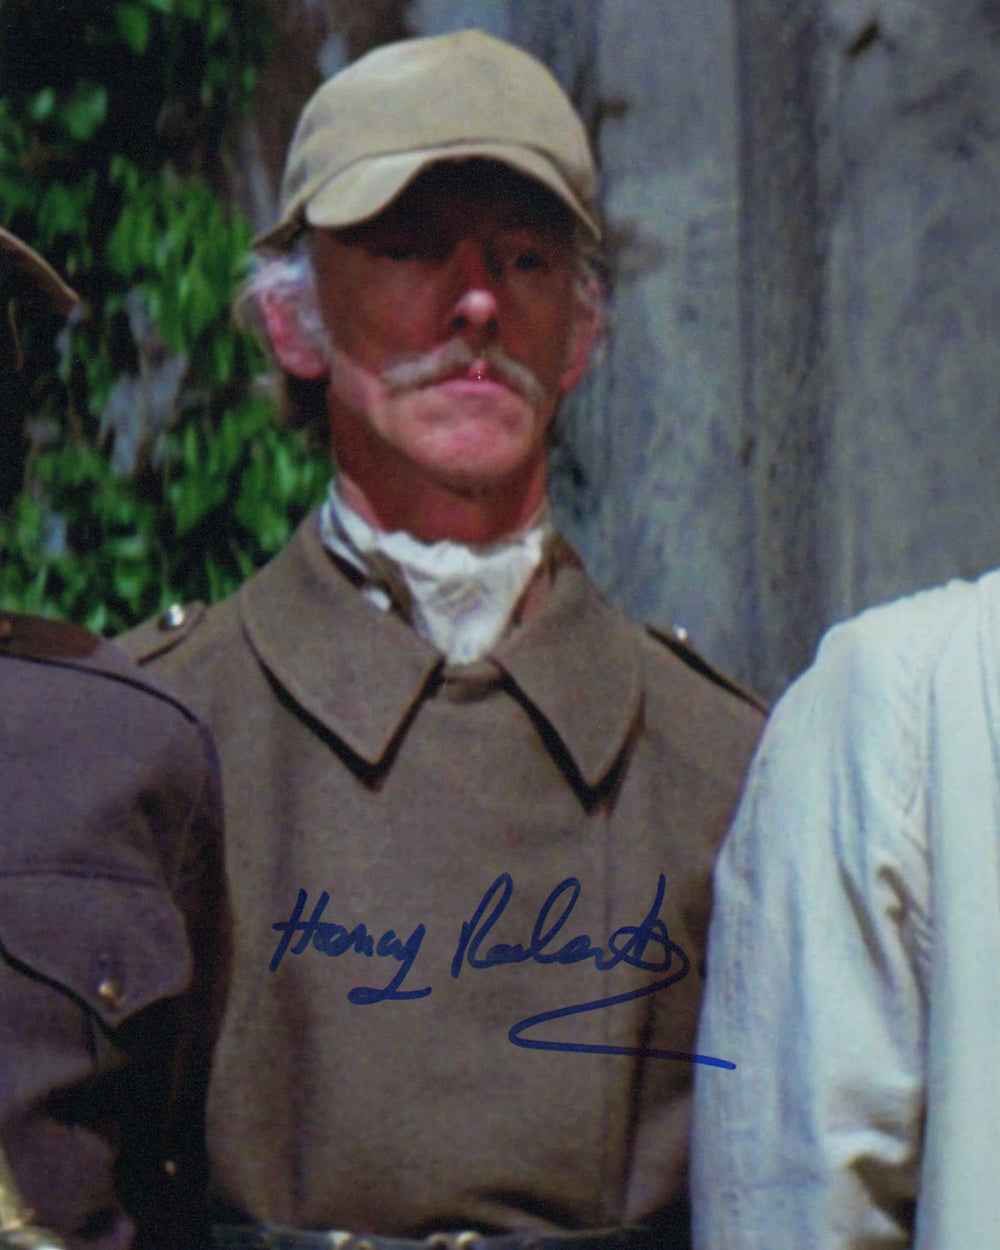 Henry Roberts as Anj Zavor in Star Wars: A New Hope (Show Masters) Signed 8x10 Photo